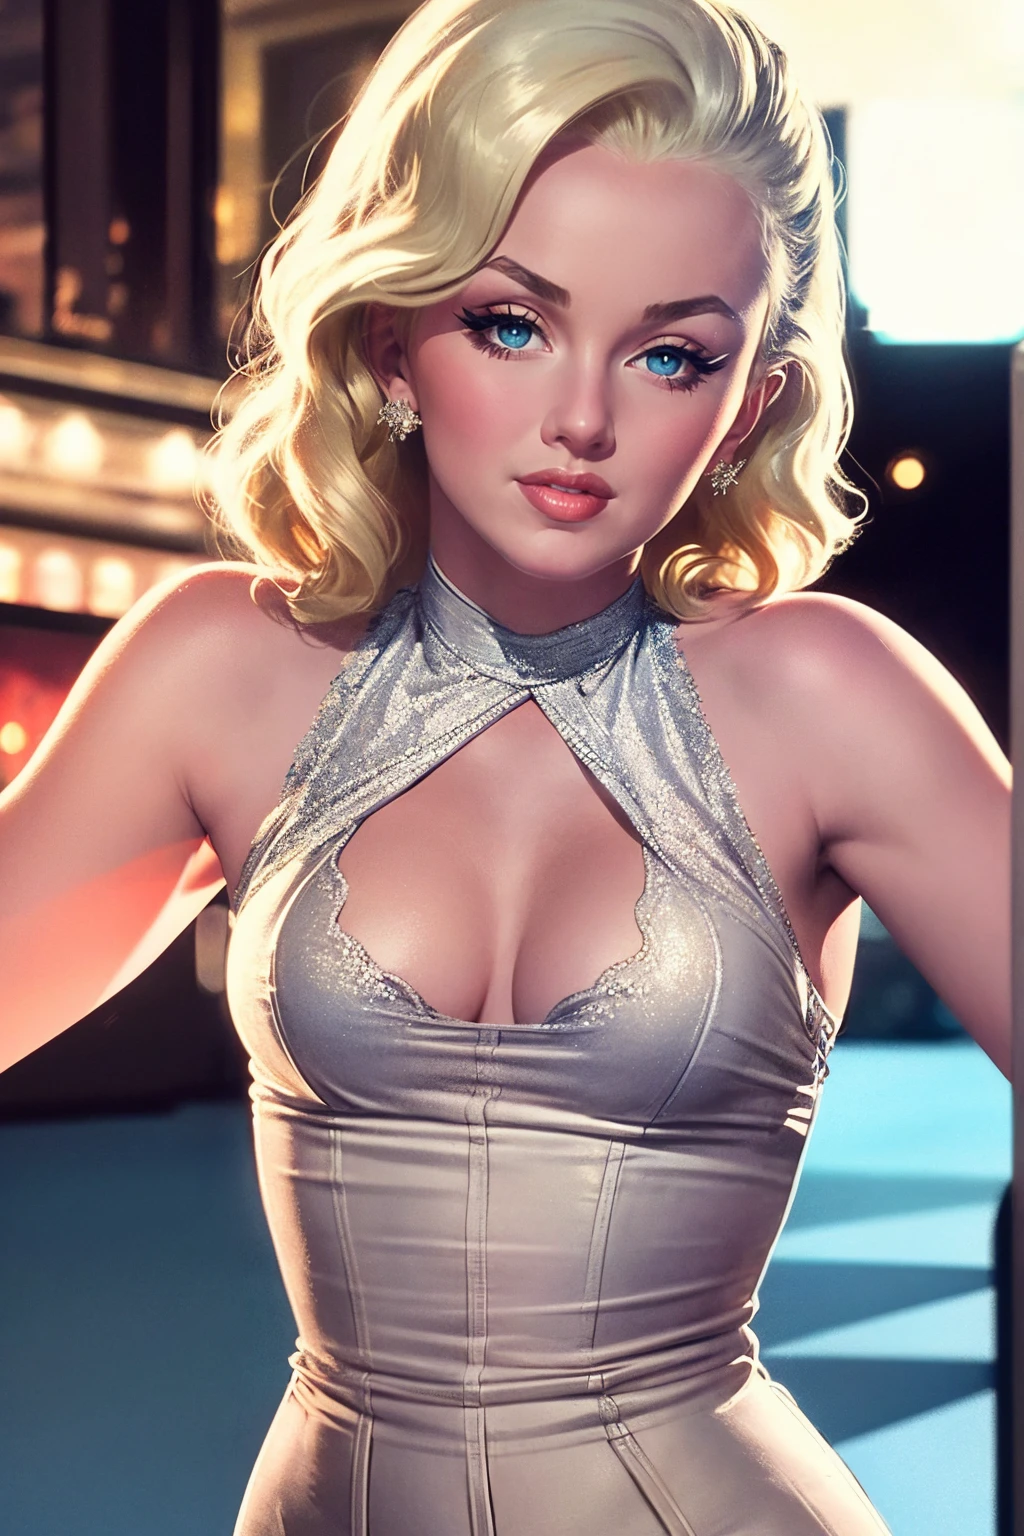 (vintage style), 1 Marilyn Monroe, extremely beautiful blonde. Extremely slender, big bright blue eyes, wearing a transparent shirt showing shoulders, medium serious, perky breasts, symmetrical body, sensualizing, pouting with orgasmic expression, highly exciting, vintage style, high quality 32k, UHD, hyper-realistic, cinematic, dynamic close-up.